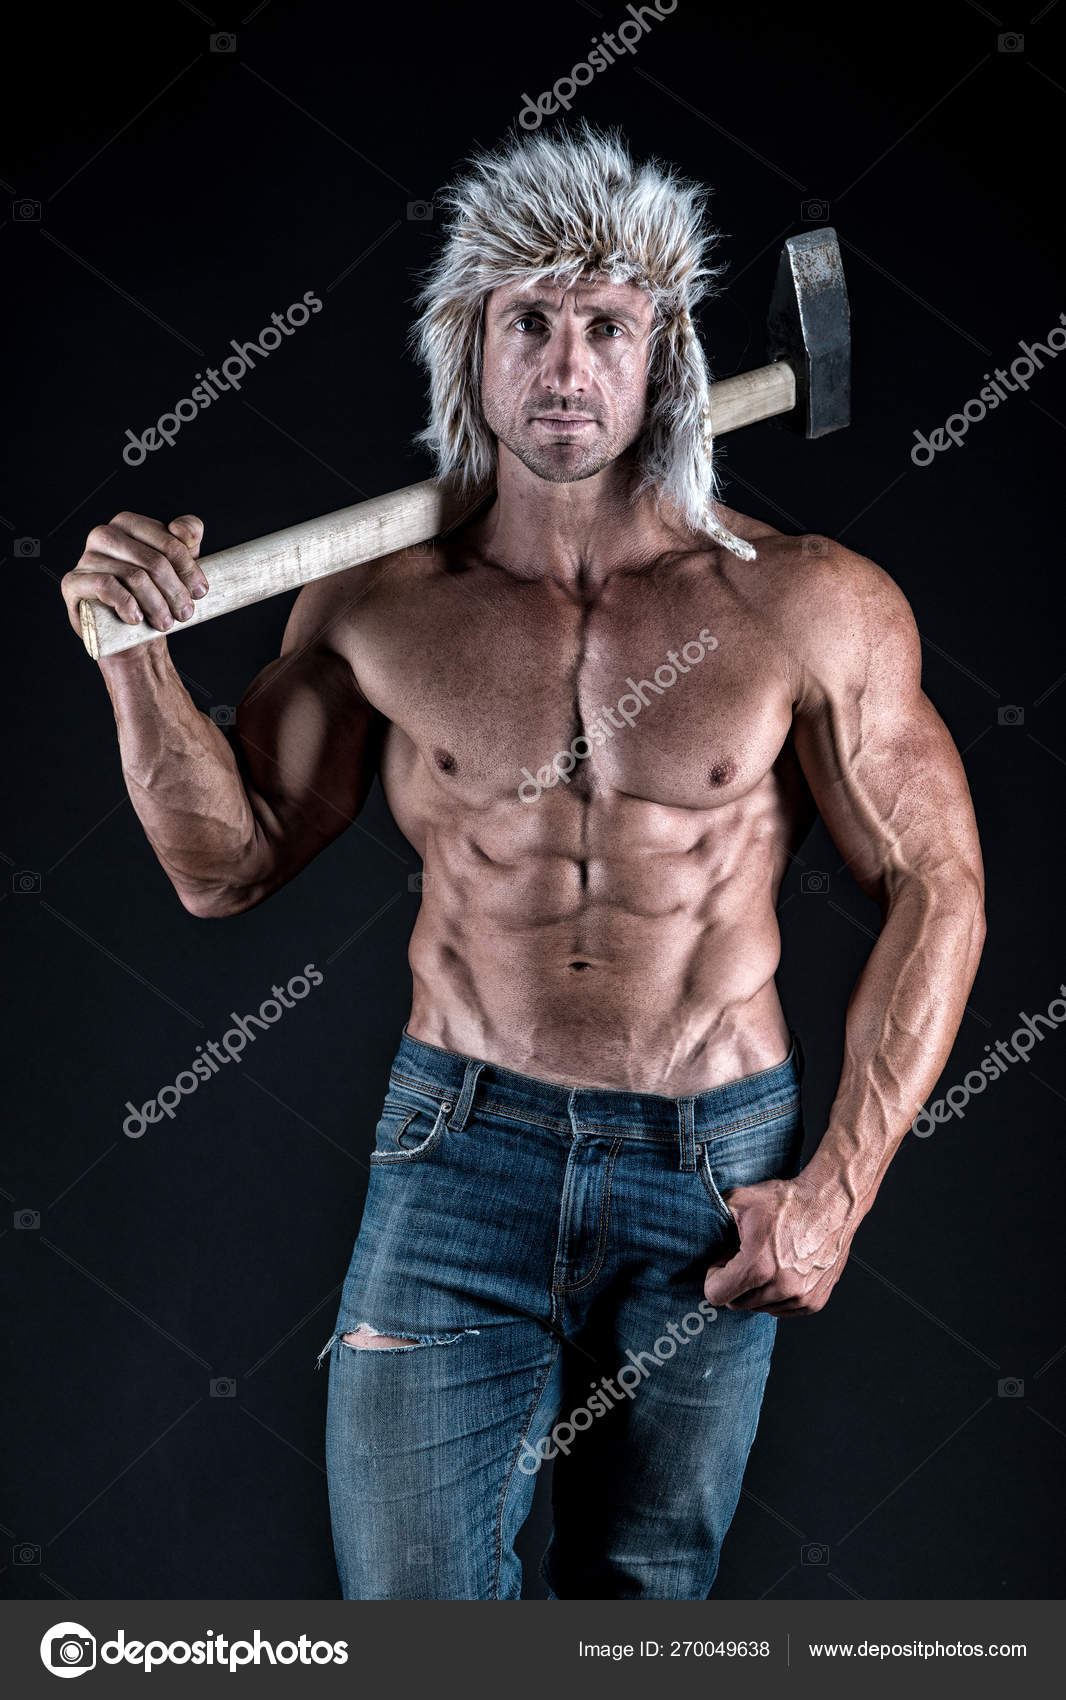 Brutality is new sexy. Lumberjack woodman sexy naked muscular torso. Man  brutal attractive guy. Axe woodsman equipment. Man brutal sexy lumberjack  carry axe. Masculine concept. Erotic lumberjack Stock Photo by ©stetsik  270049638